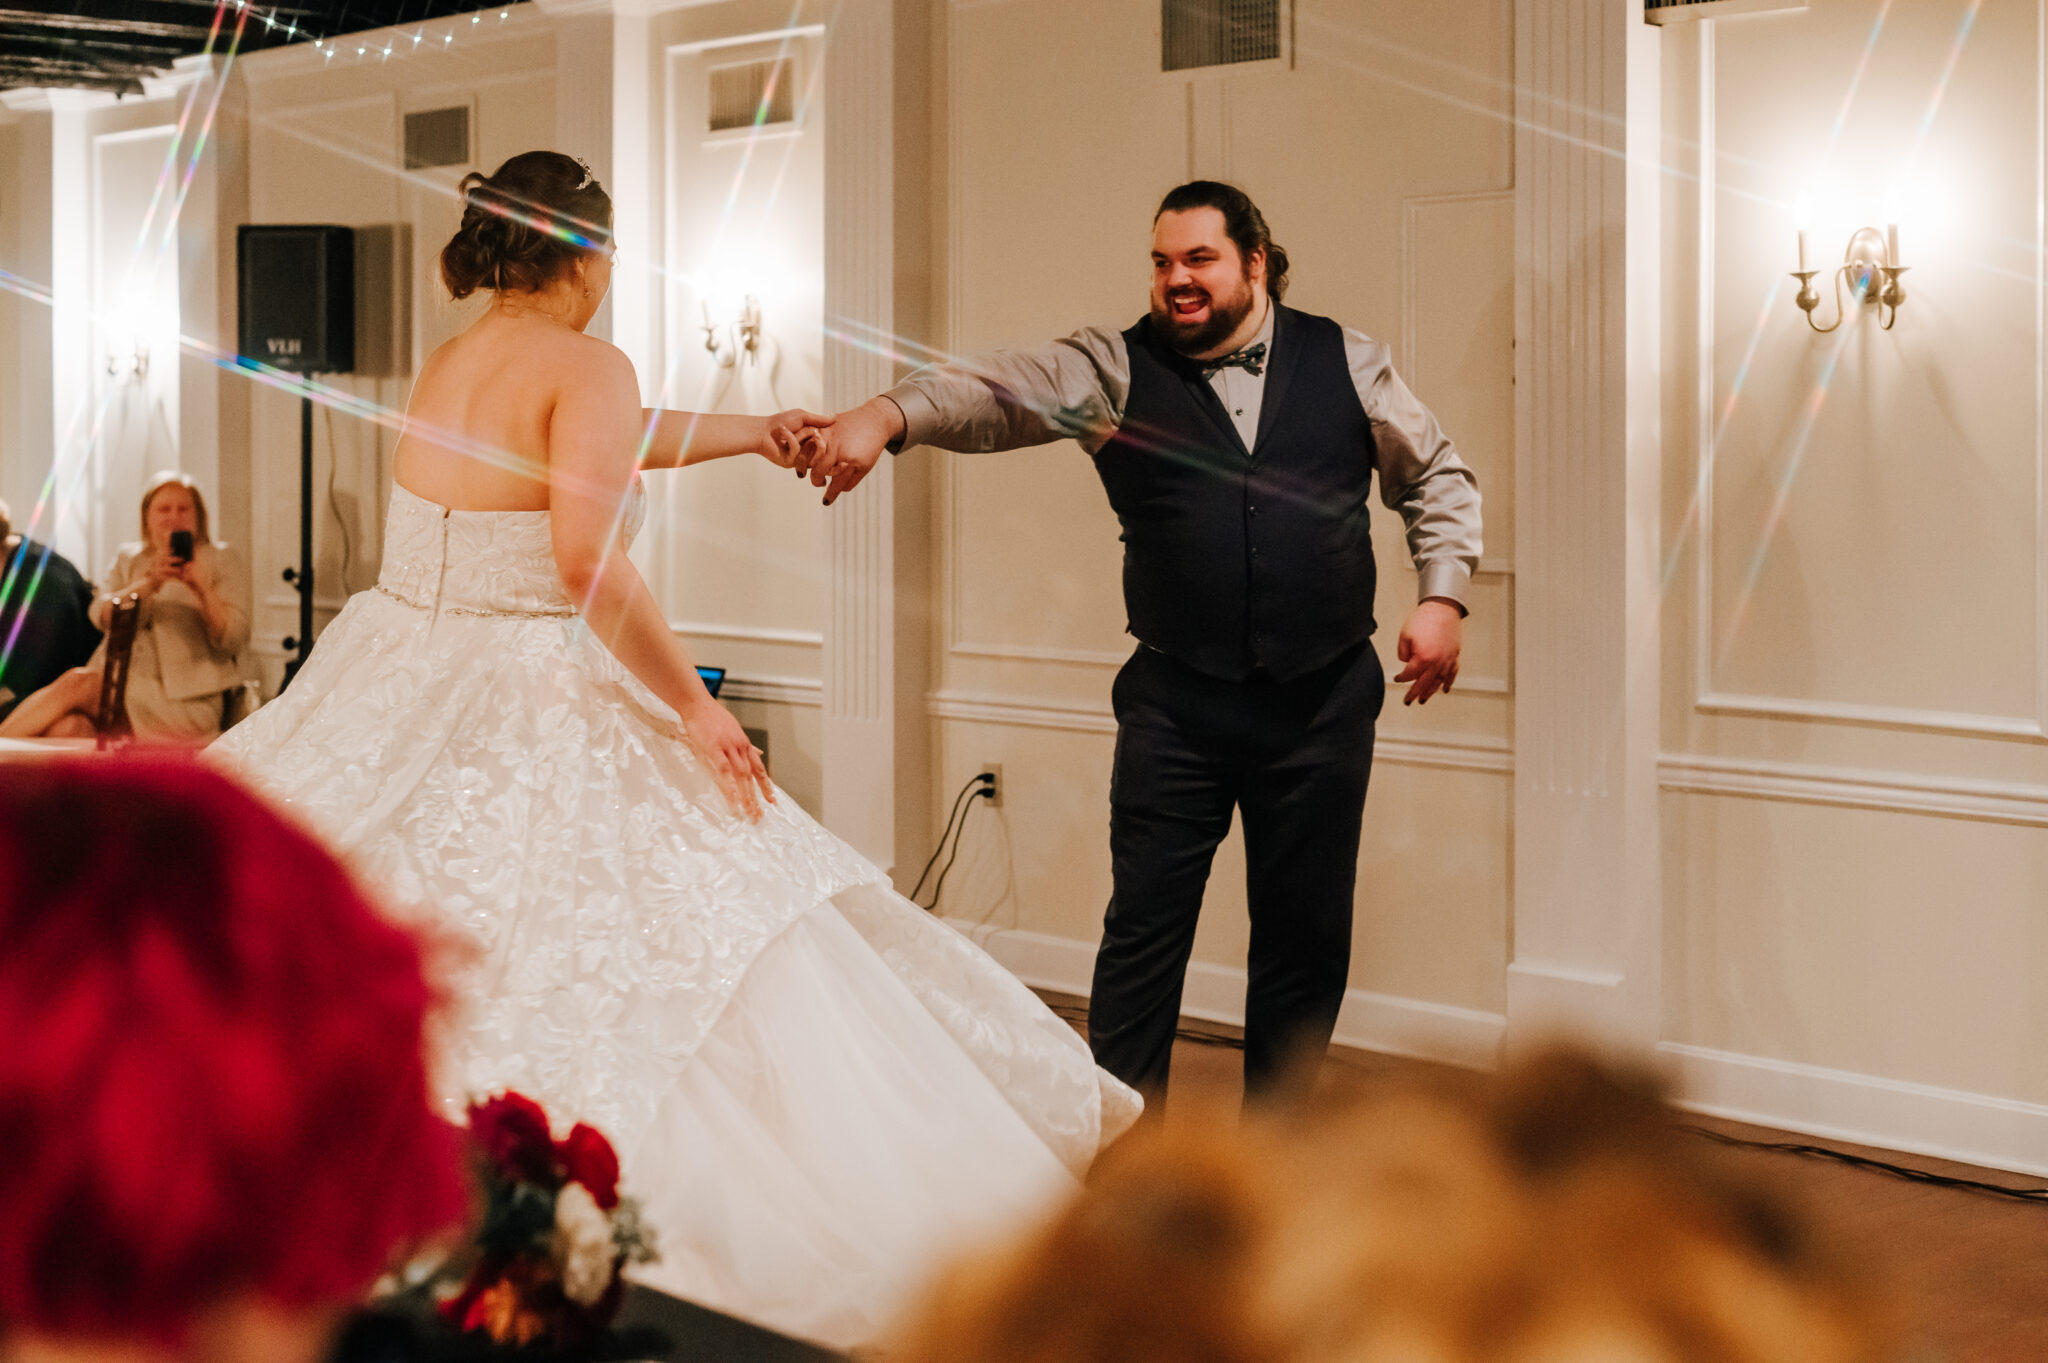 A groom spins his bride at their wedding reception